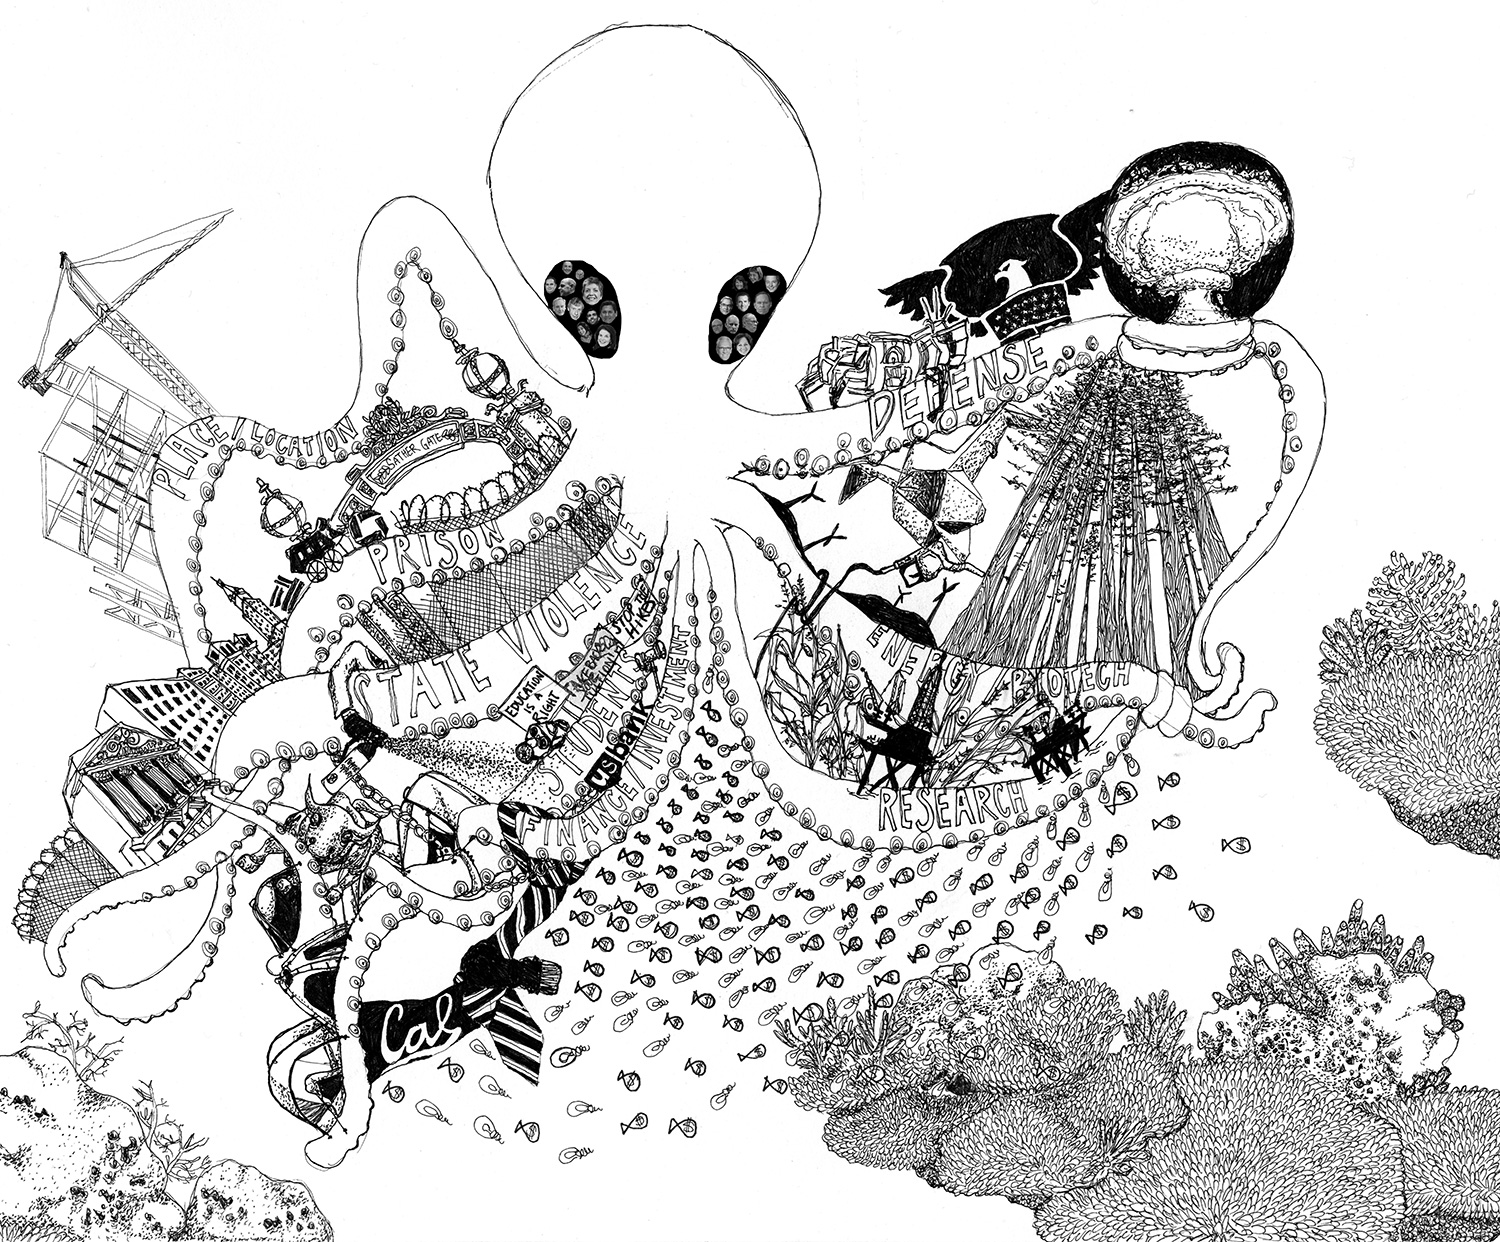 The Octopus, drawing by Nicci Yin Created as part of the presentation “The Octopus: Cognitive Capitalism and the University” with Natalia Cecire and Miriam Neptune at The Scholar & Feminist 2015: Action on Educaiton. - See more at: http://sfonline.barnard.edu/navigating-neoliberalism-in-the-academy-nonprofits-and-beyond/about-this-issue/#imageclose-2467